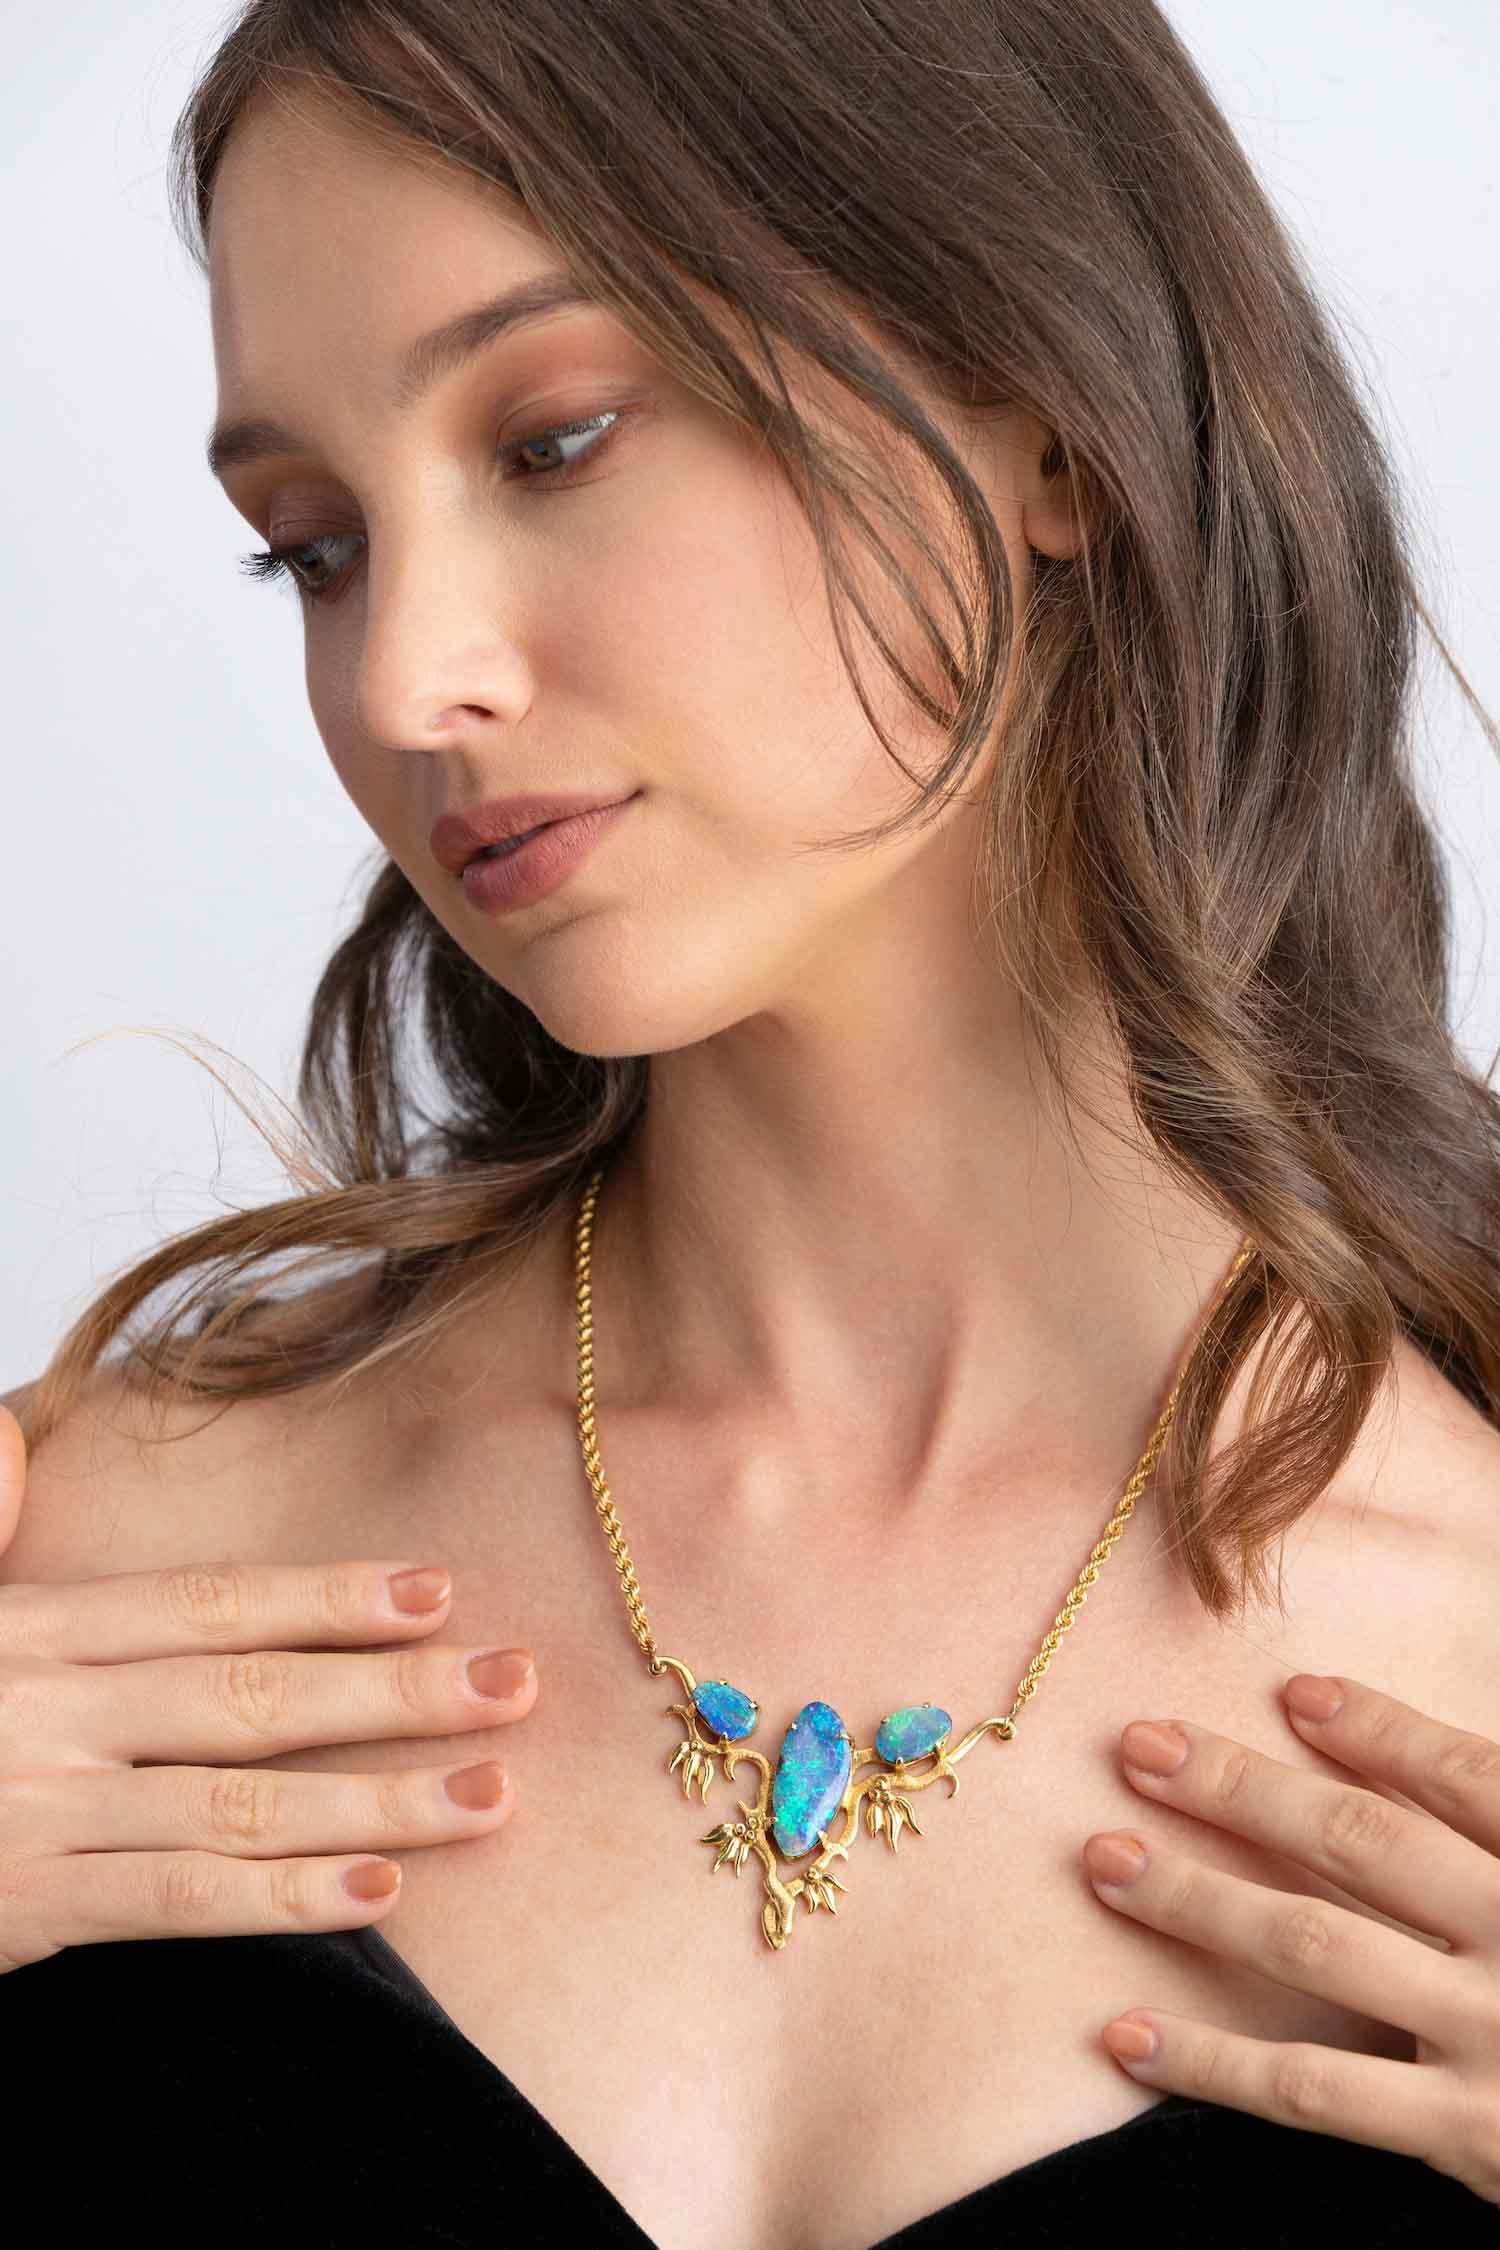 'There Are Fairies at The Bottom of My Garden' opal necklace represents the Australian wattle and its flowers. The superb boulder opals ethically sourced from Jundah-Opalville and Winton mines in Australia, capture the beauty and charm of its